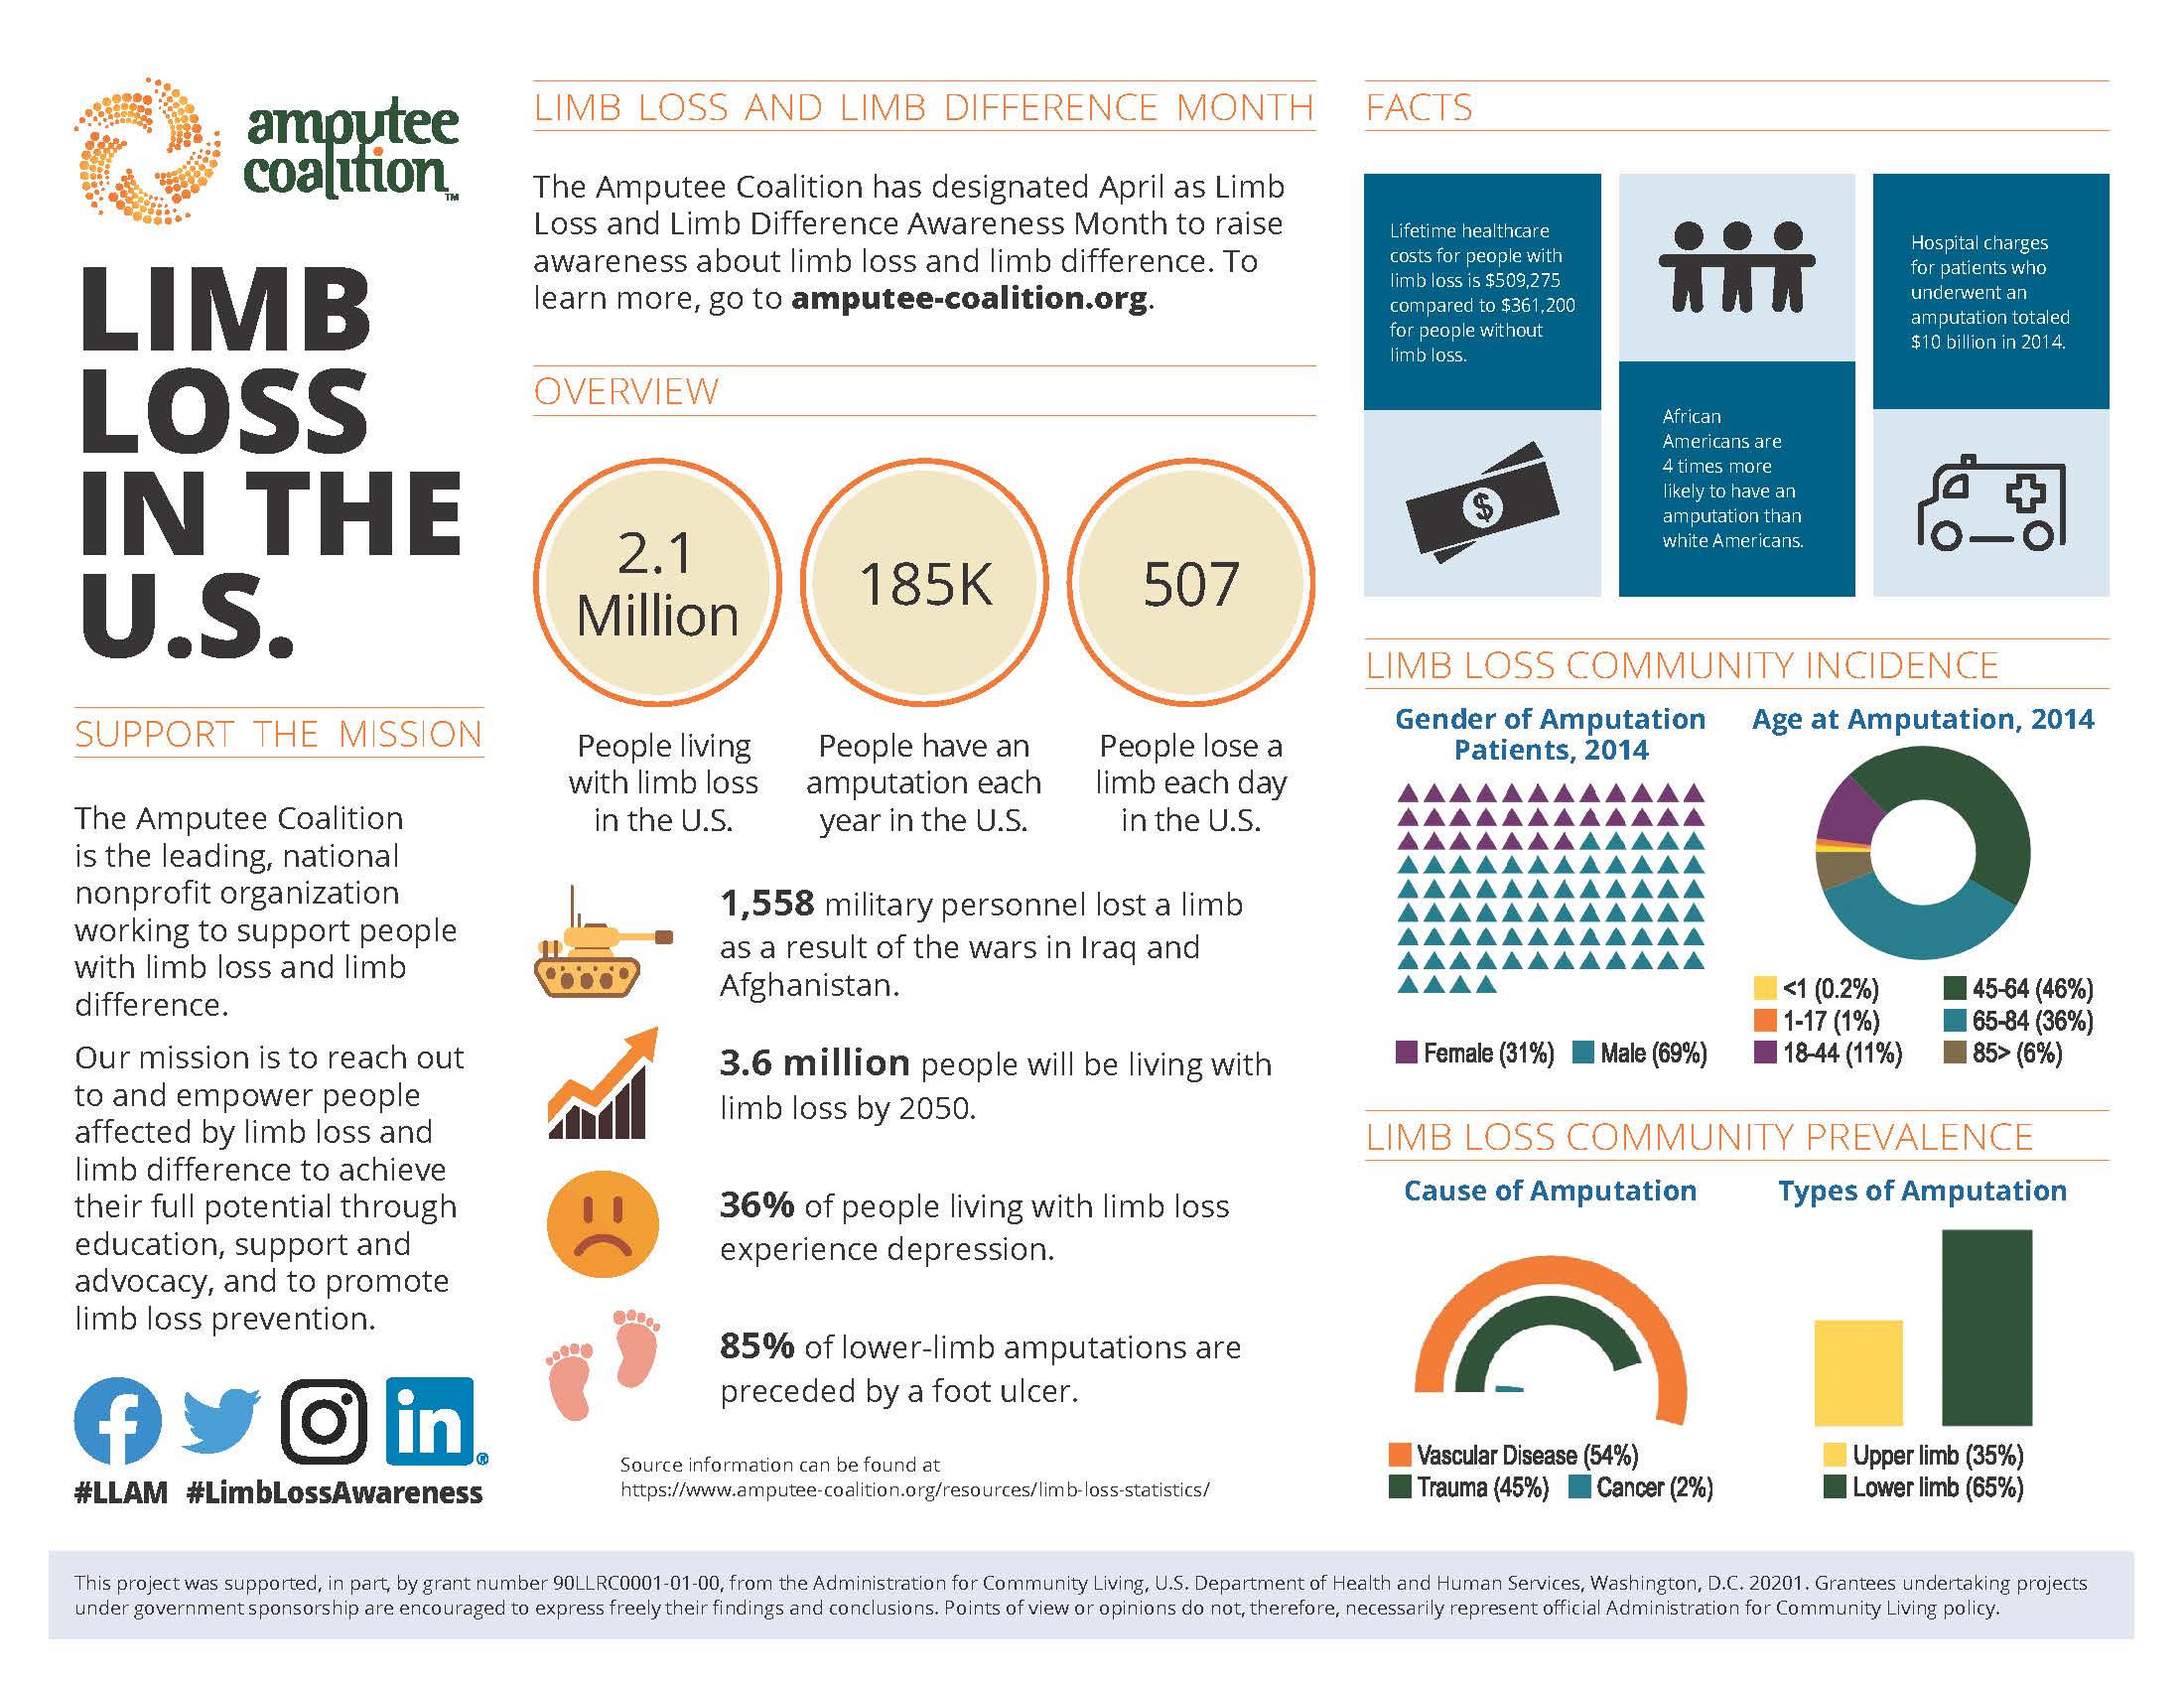 Limb Loss in the U.S. Infographic